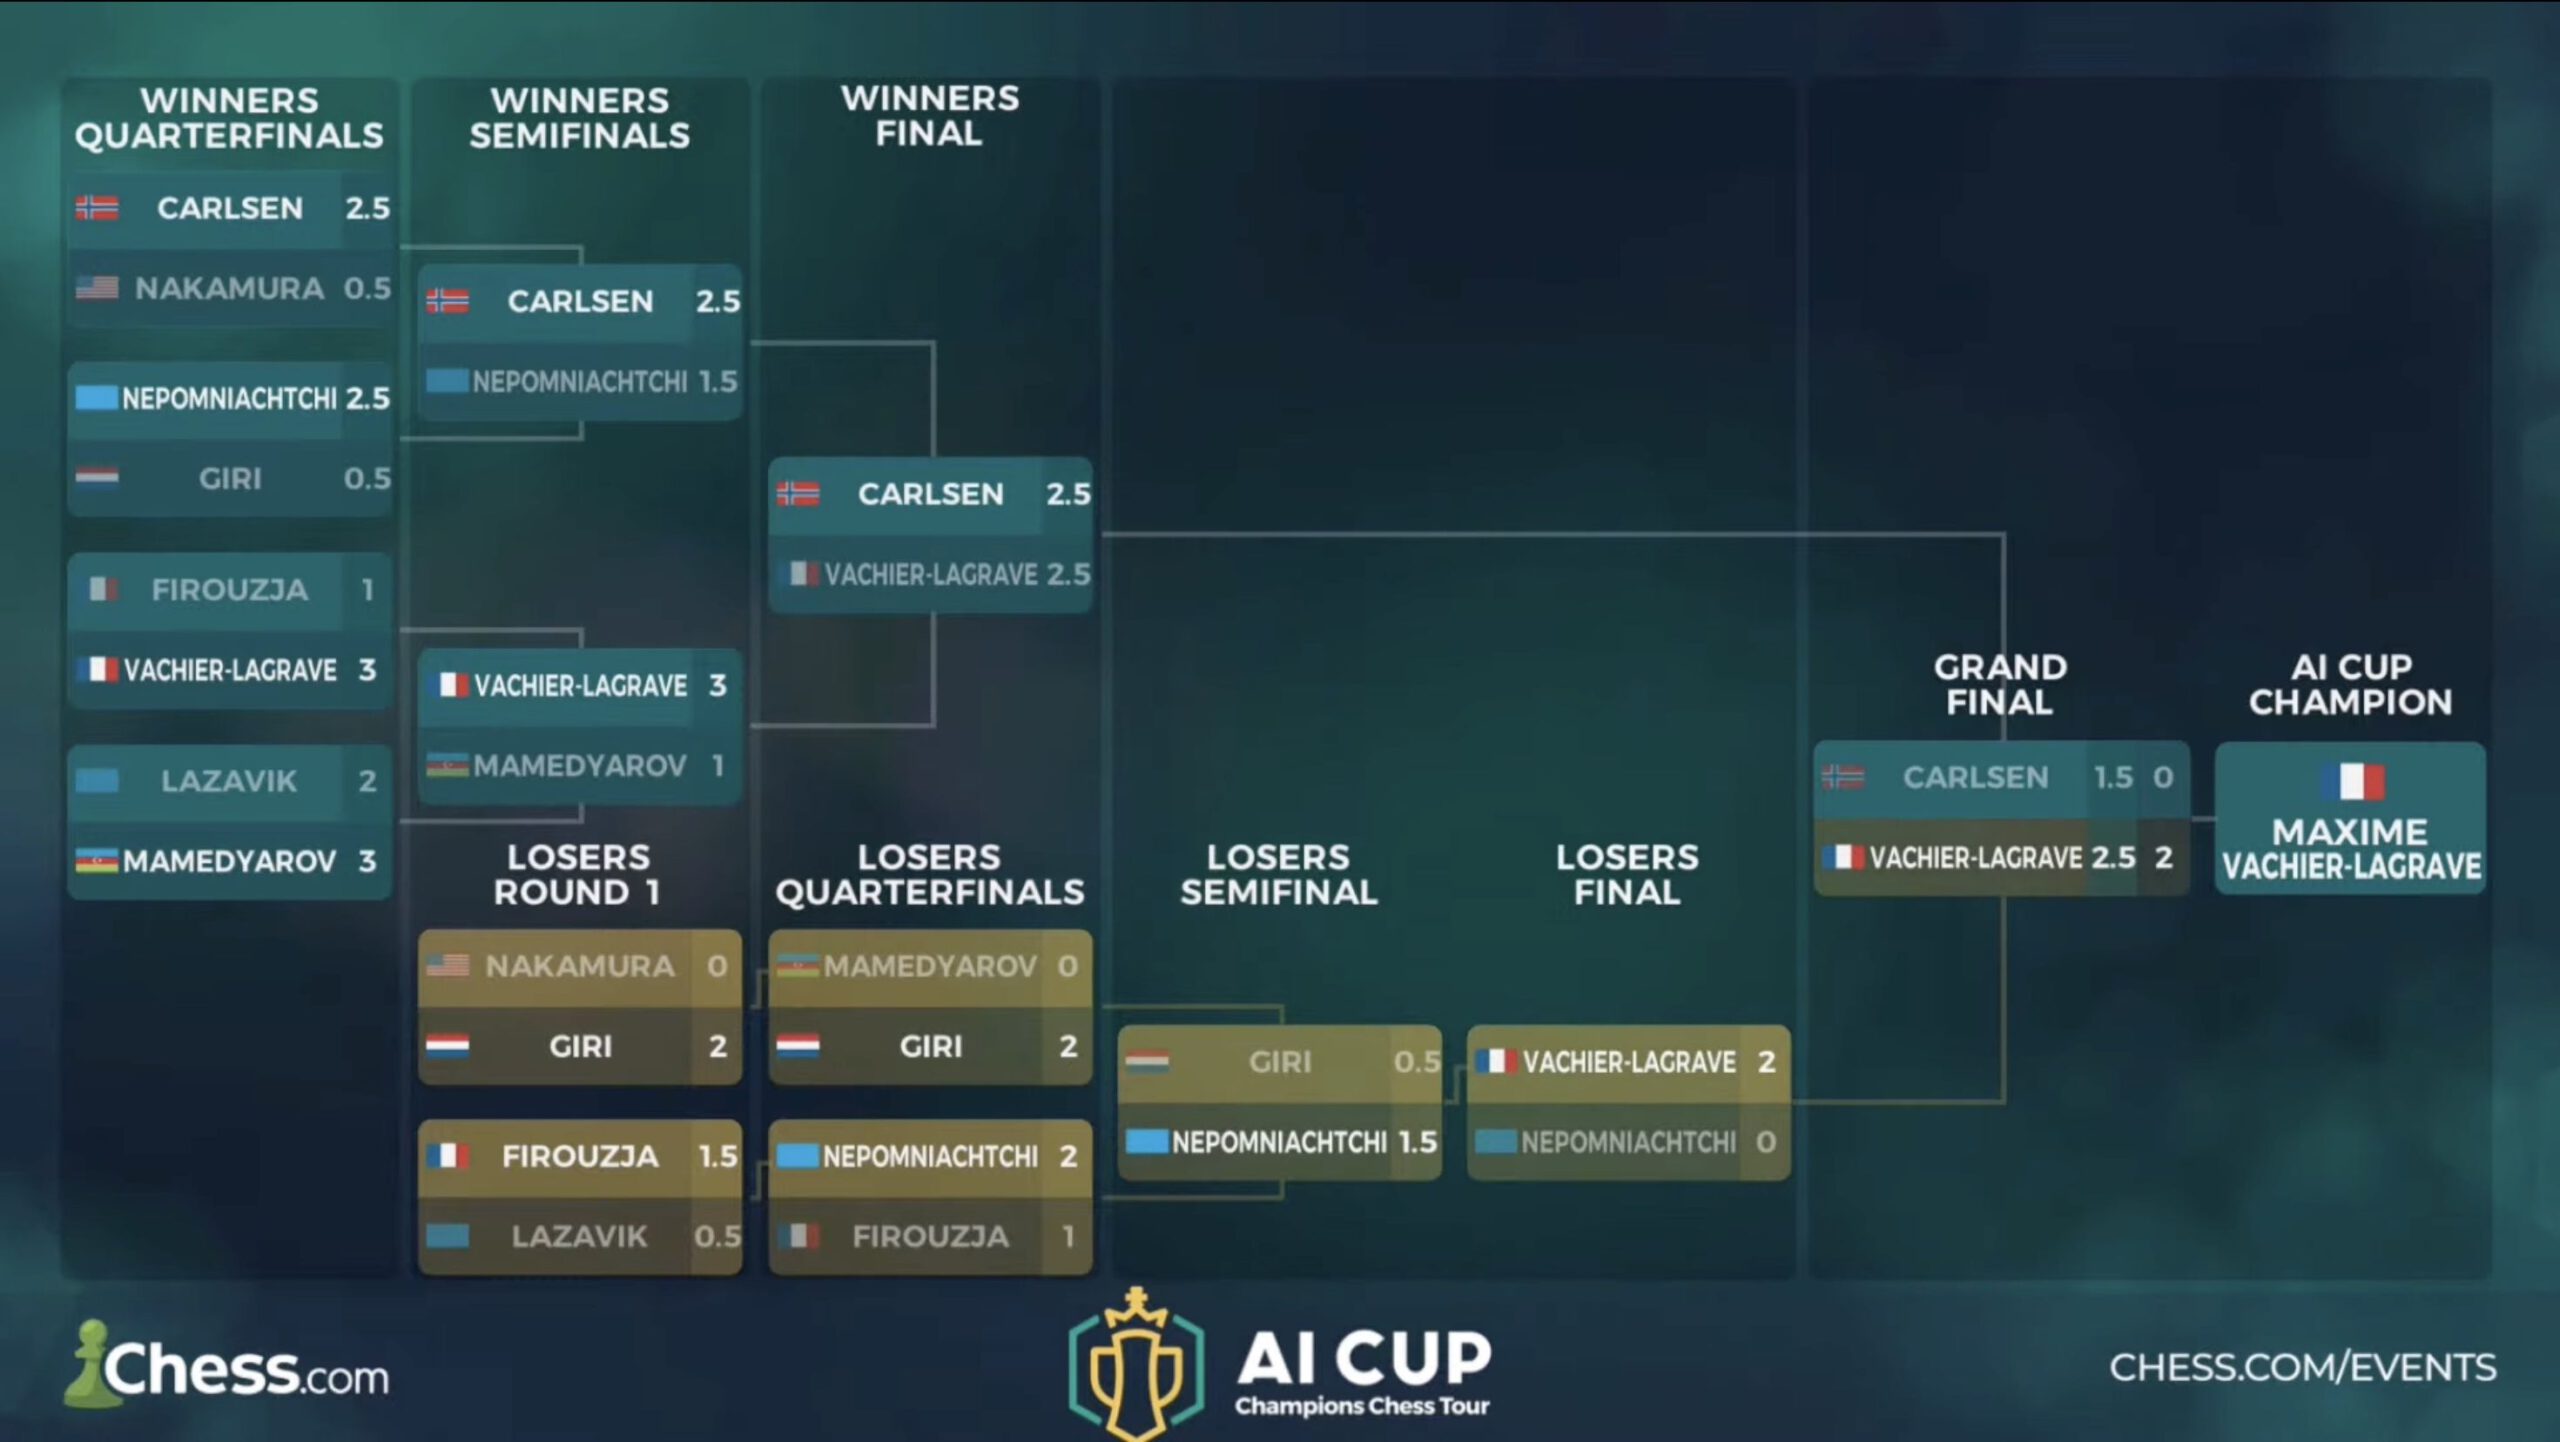 Division I, II, and III of the AI Cup